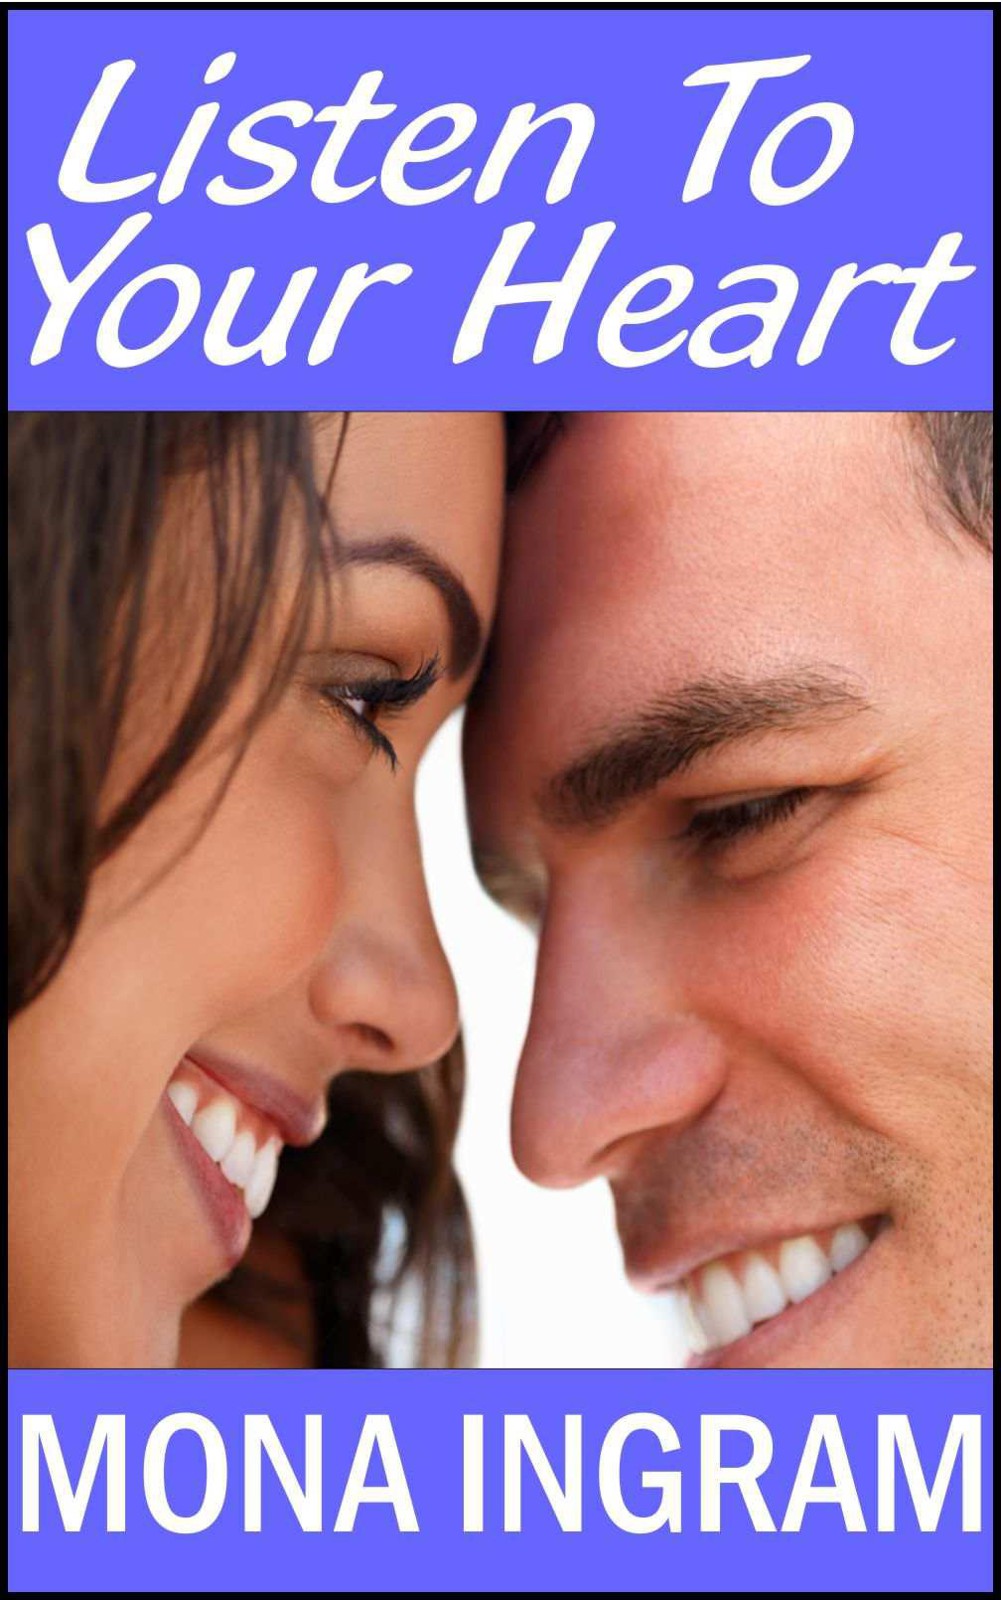 Listen to Your Heart by Mona Ingram